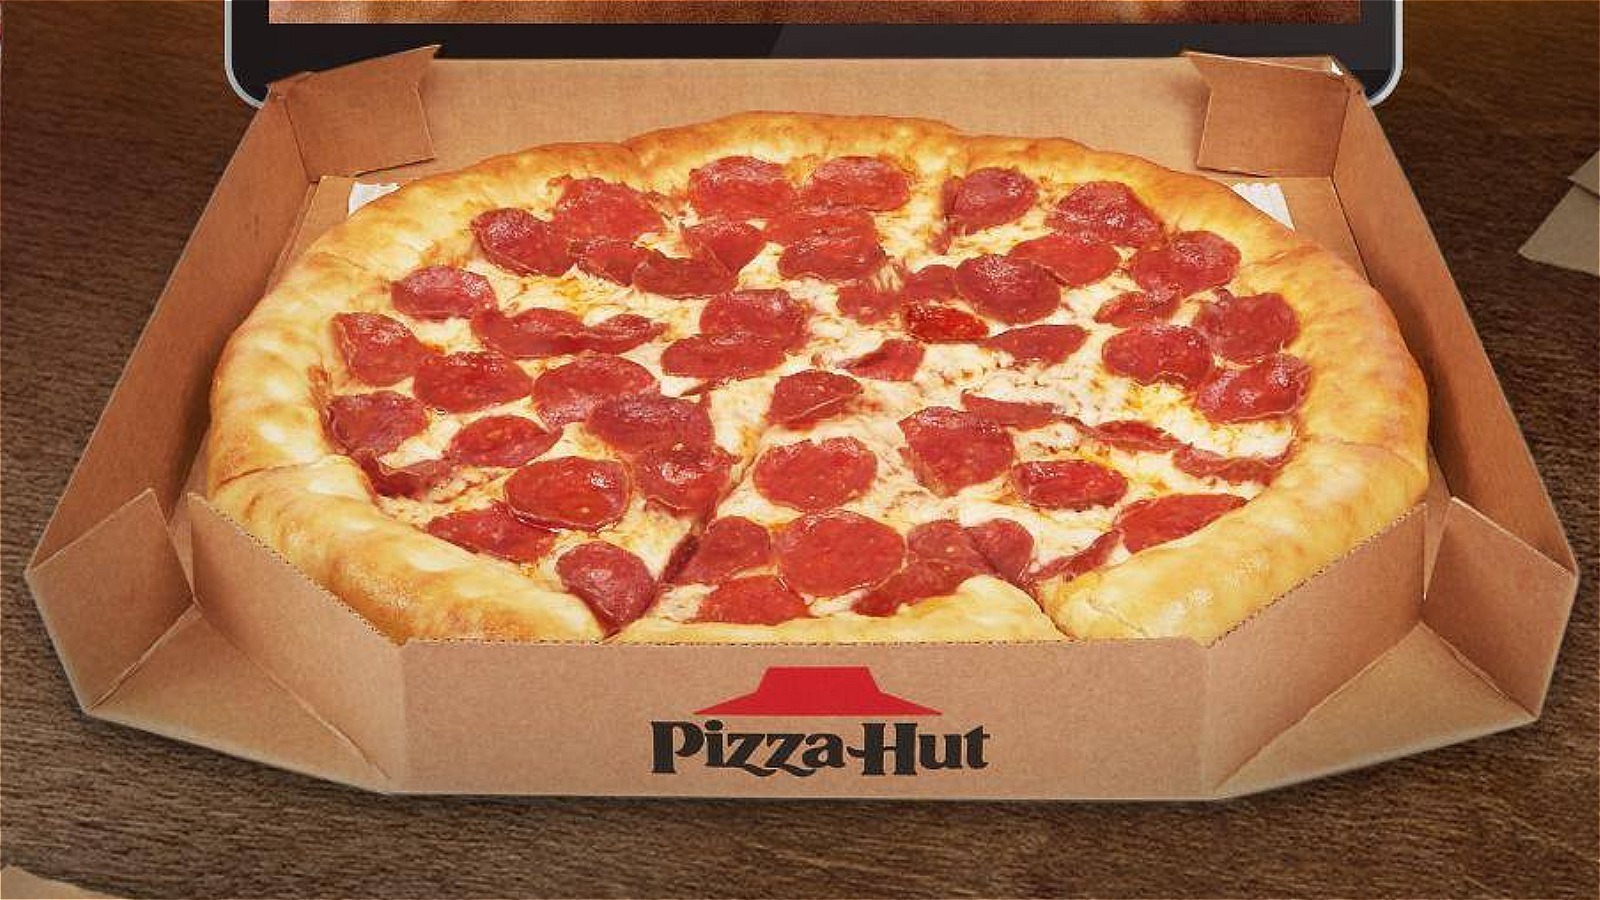 Looking For A Slice? Look No Further Than Pizza Hut's New Melts